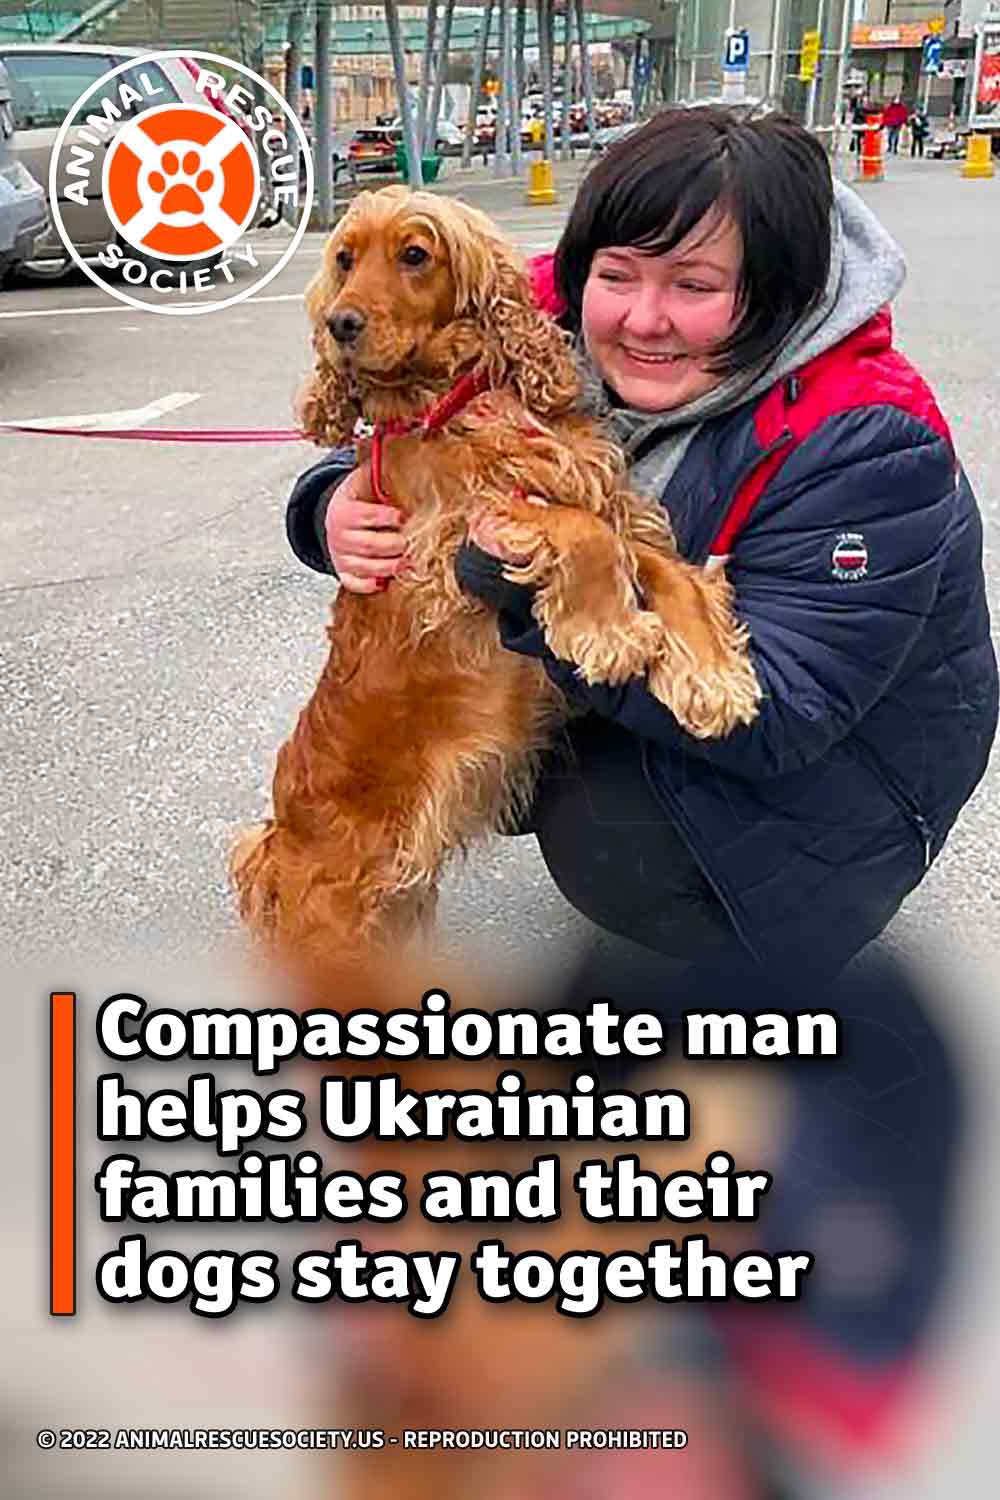 Compassionate man helps Ukrainian families and their dogs stay together